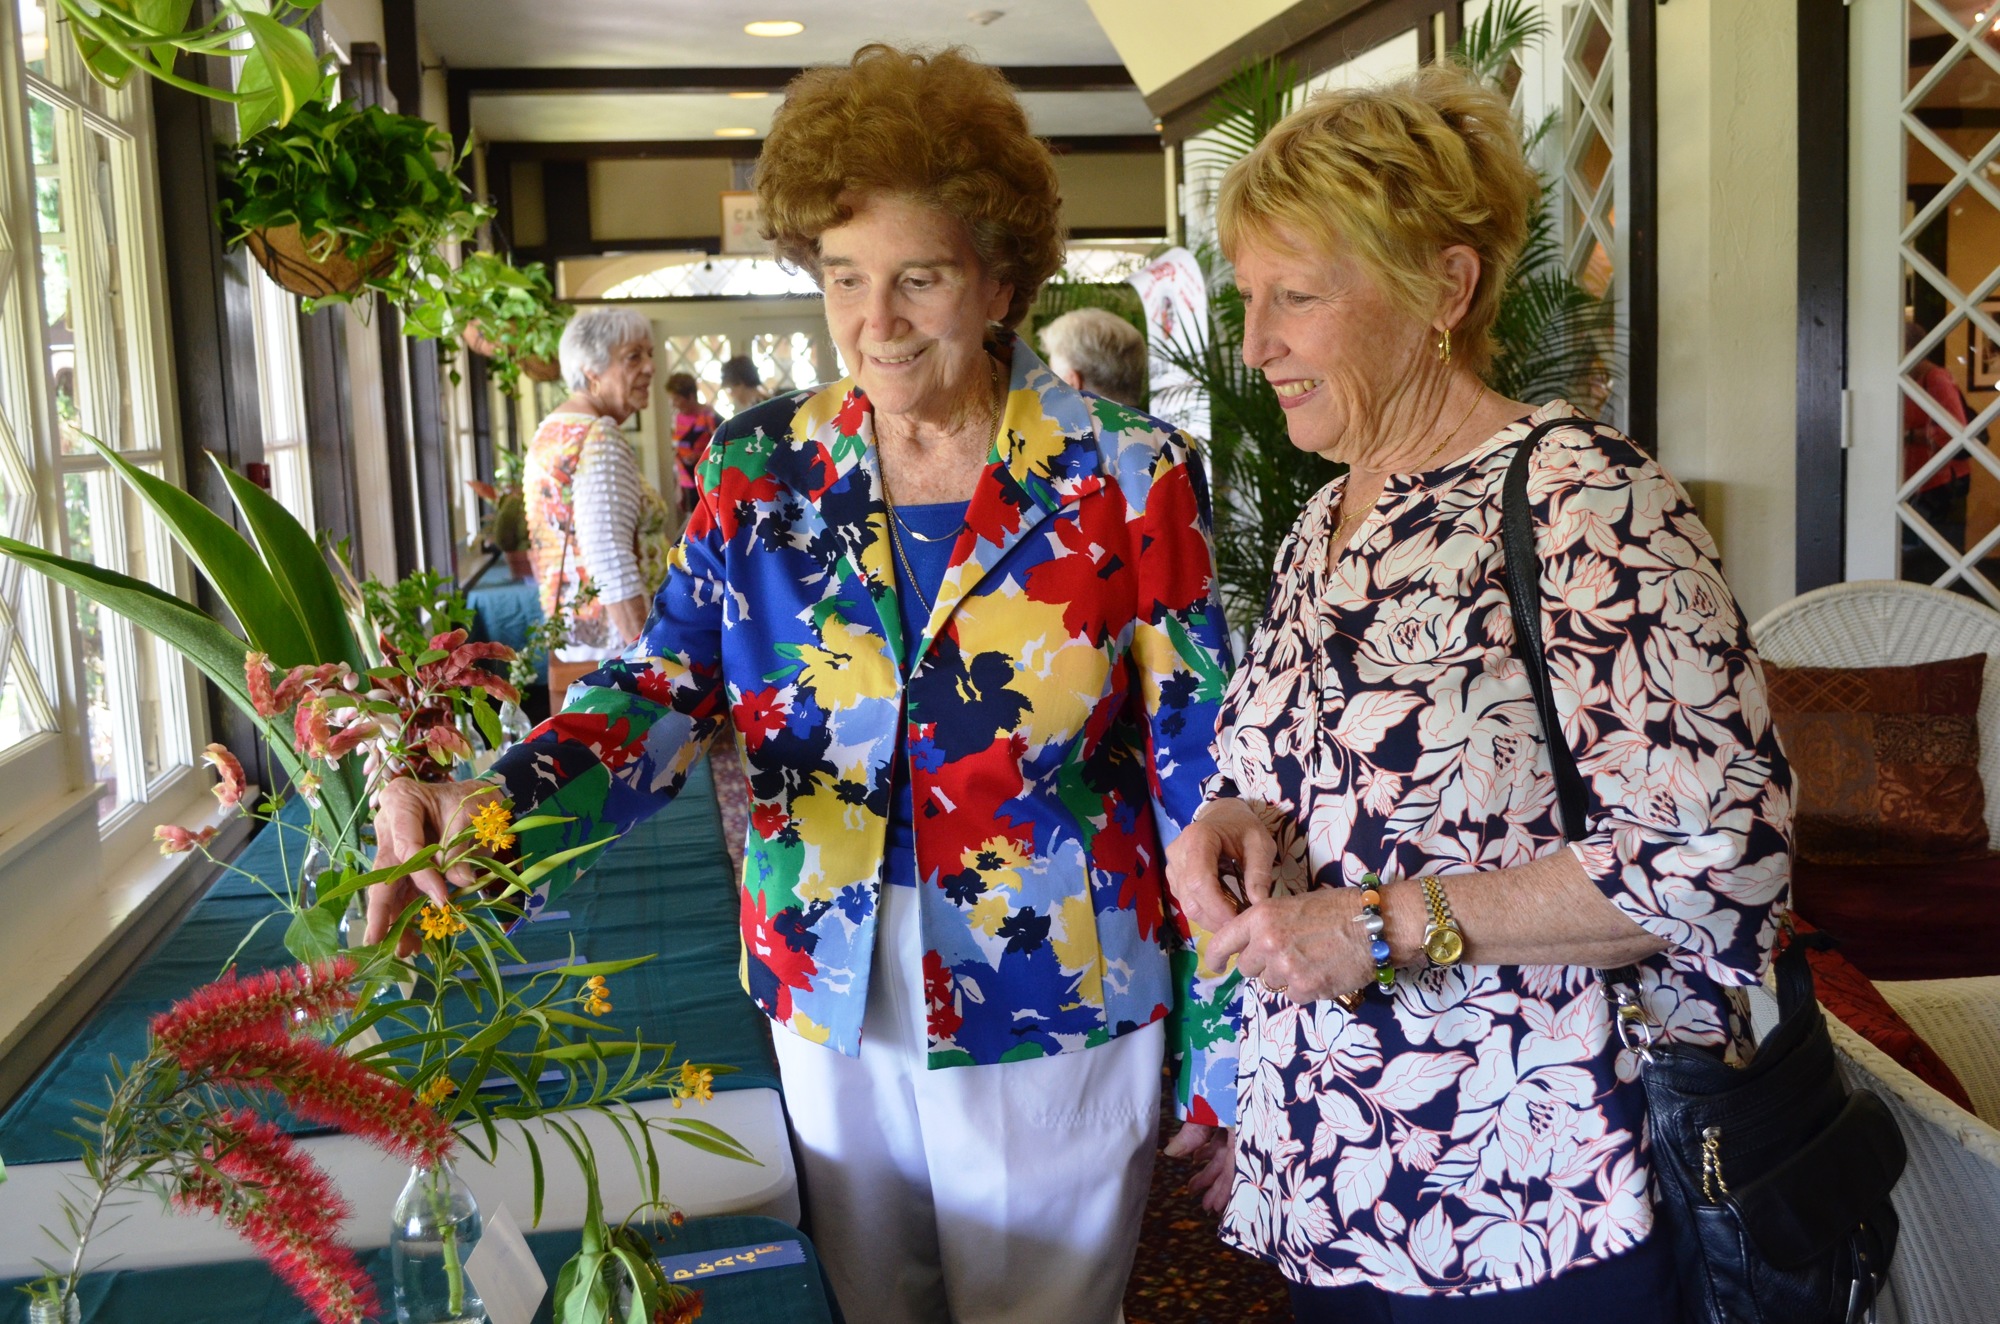 Virginia Young, horticulture chairwoman, and Carol Cababe look at plant cuttings members had brought from their yards.